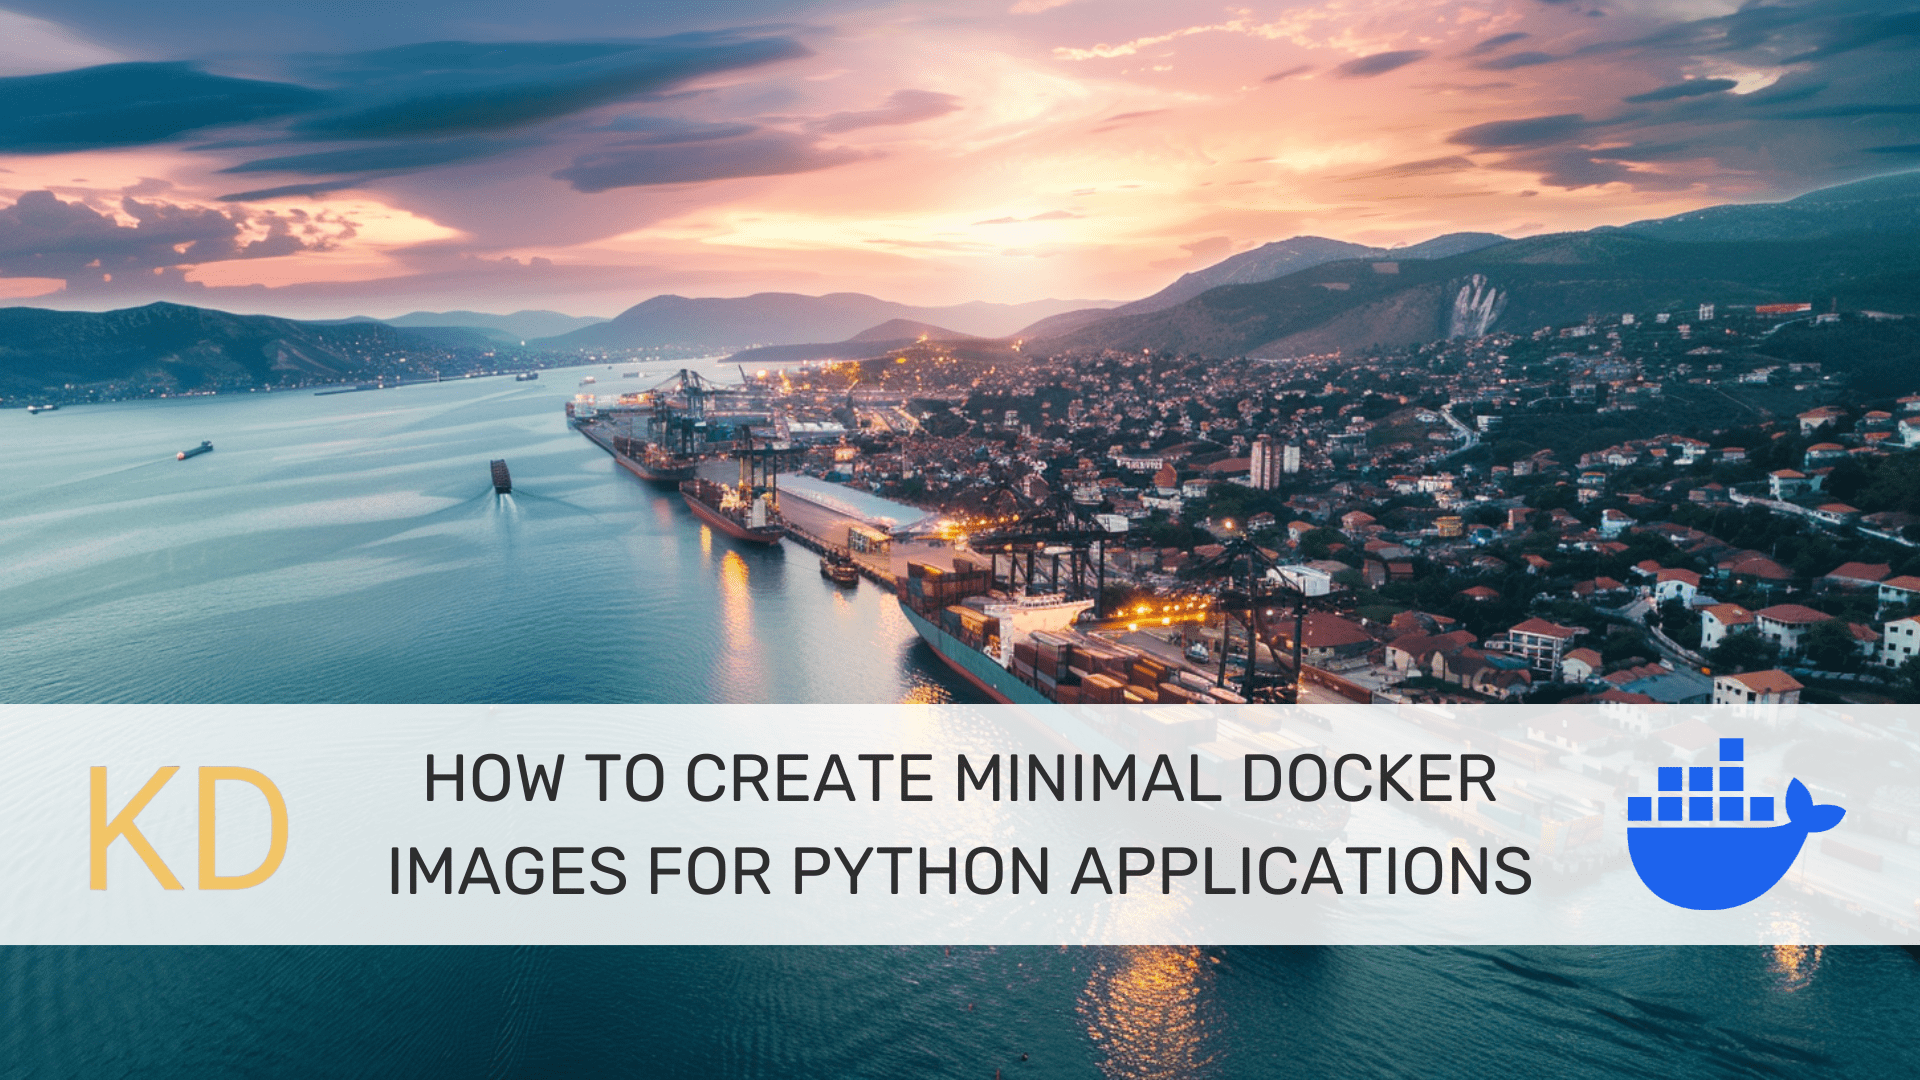 How to create minimal Docker images for Python applications